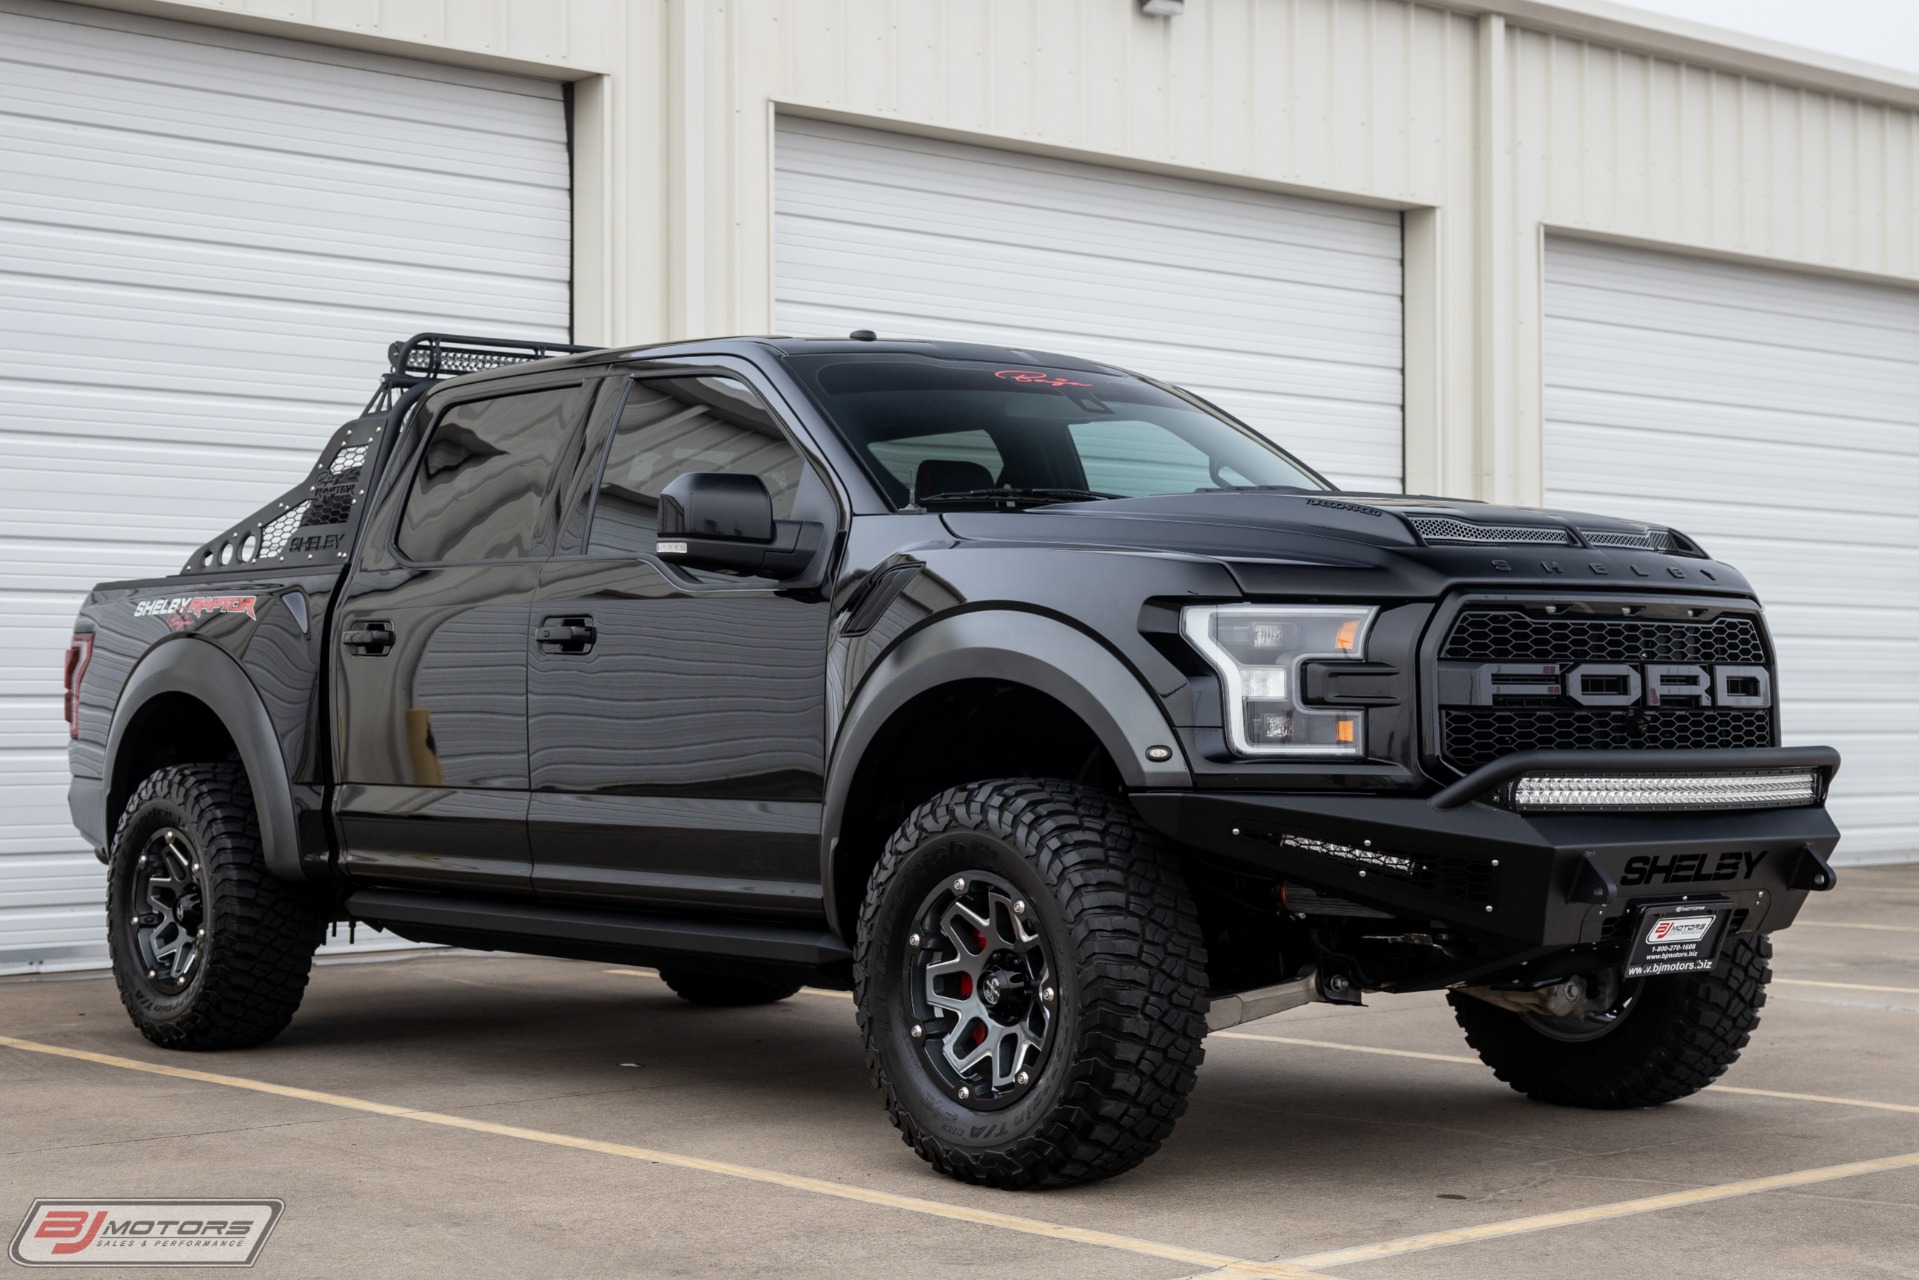 Used 2018 Ford F-150 Shelby Baja Raptor For Sale (Special Pricing) | BJ ...